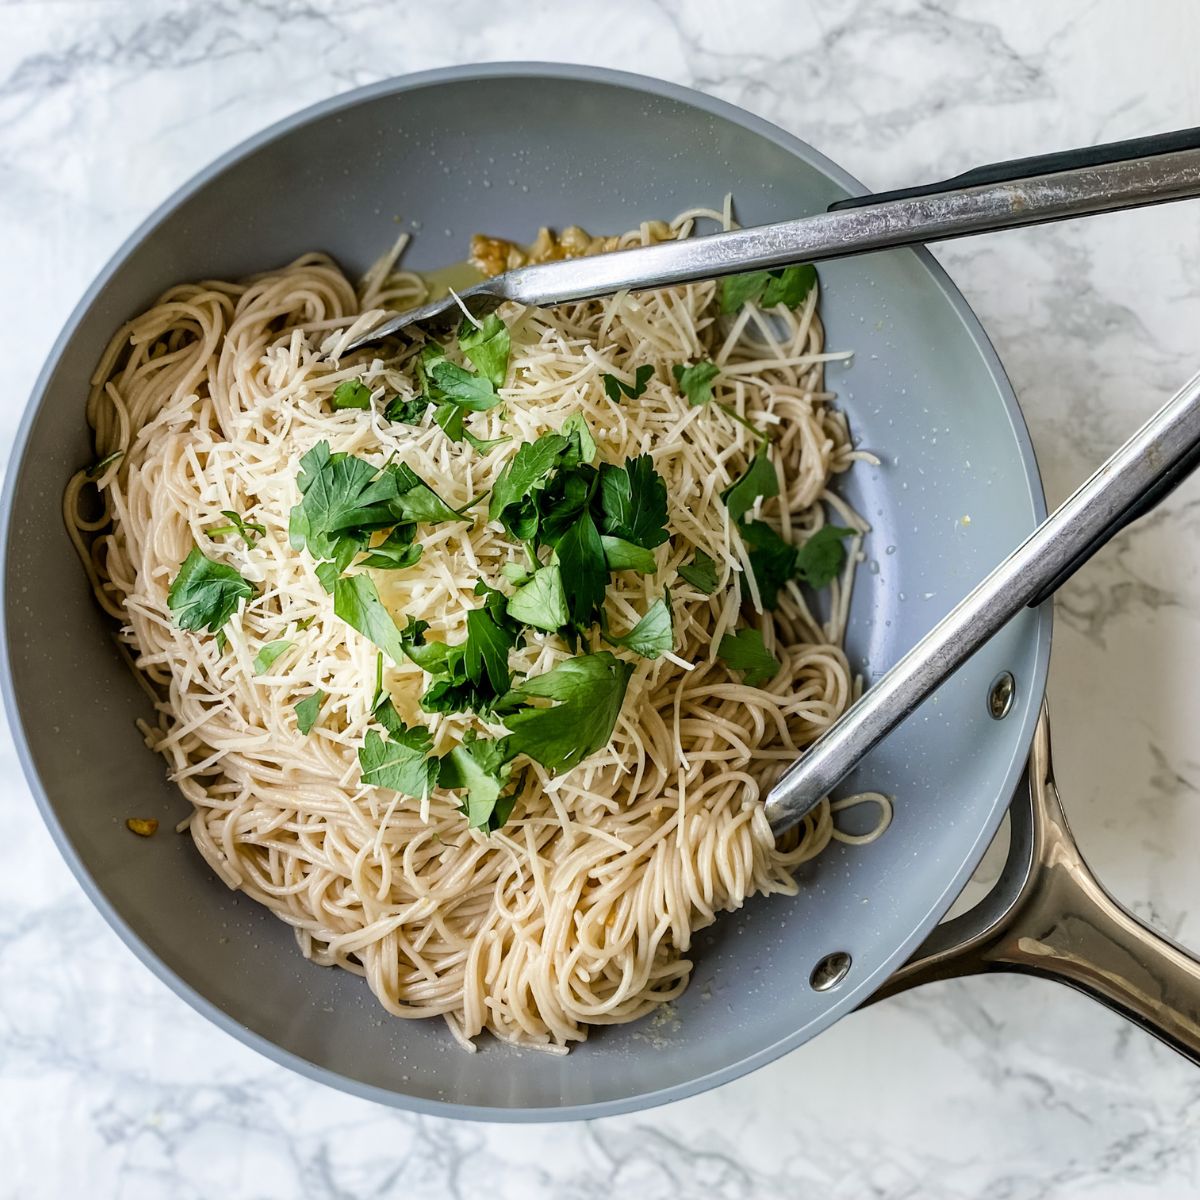 toss pasta with parmesan cheese, lemon juice and parsley.